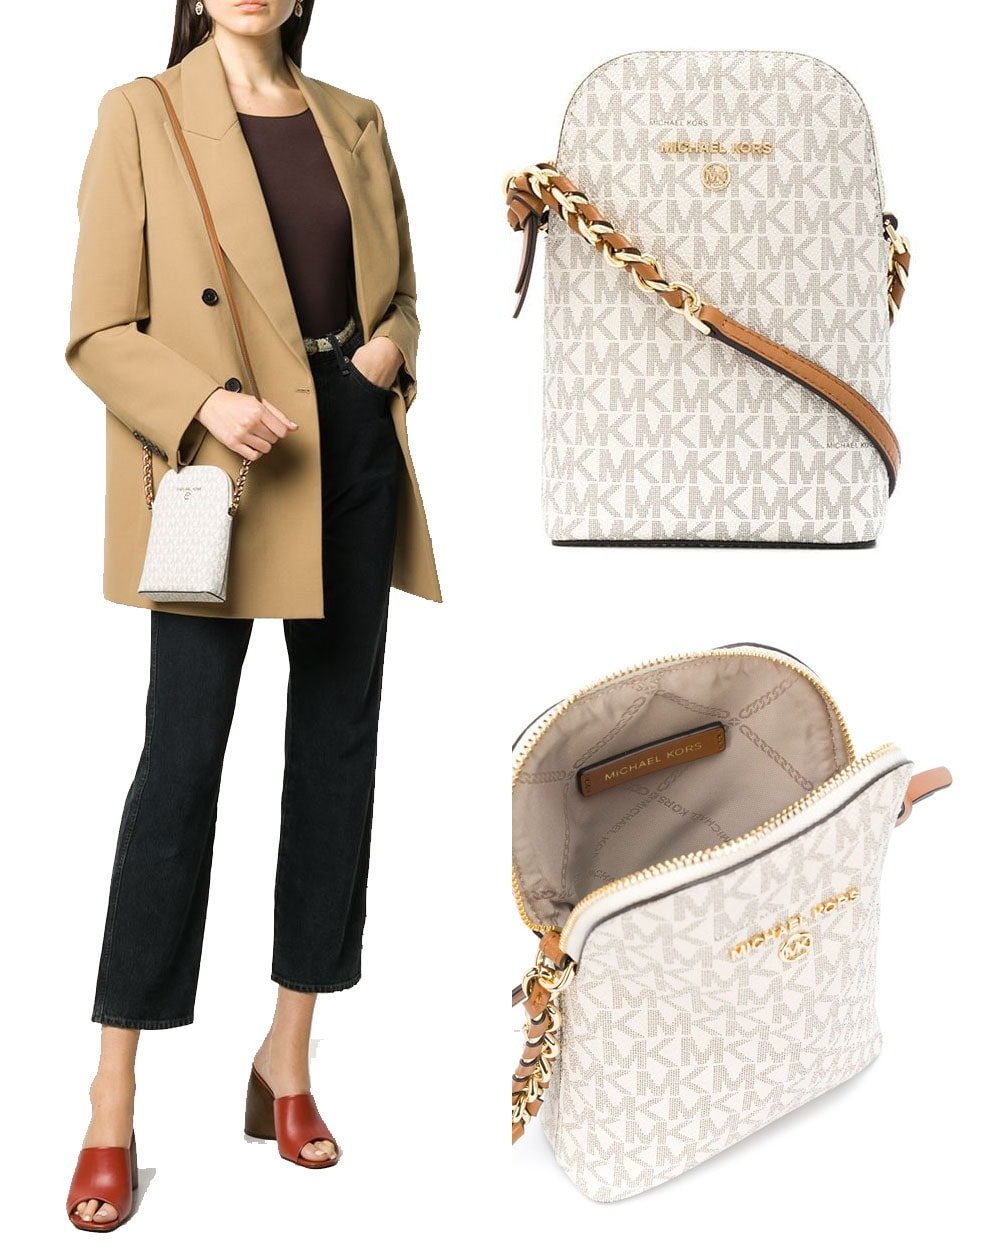 Compact but chic, the Michael Kors smartphone crossbody bag allows you to carry your cellphone in style, without the bulk